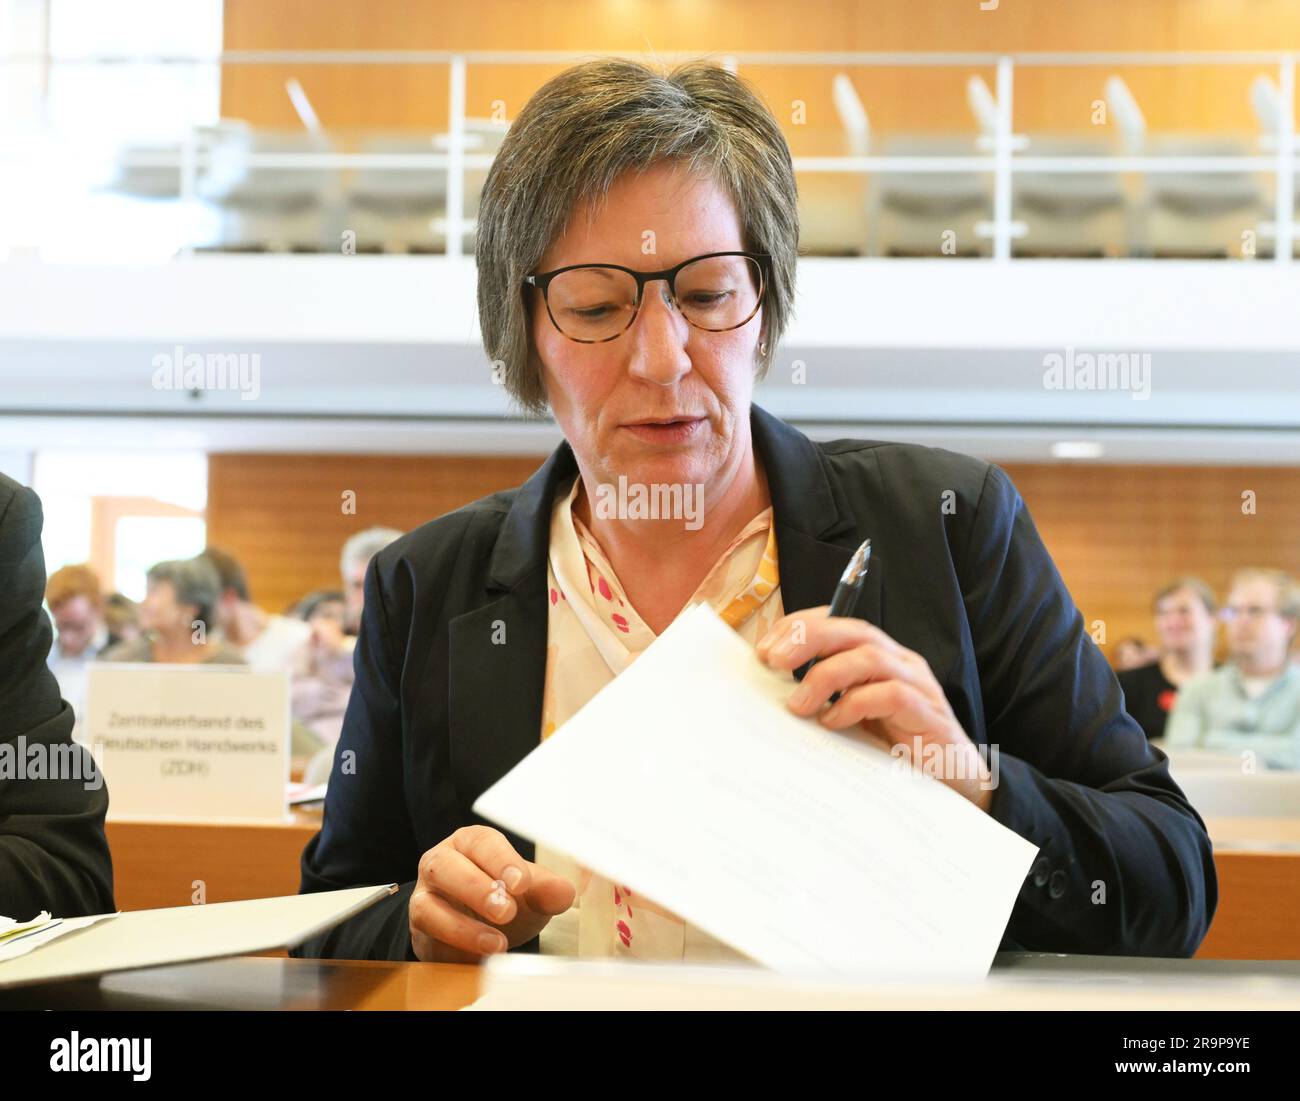 Karlsruhe, Germany. 28th June, 2023. Tanja Scherle, Federal Chairwoman of the Bundesverband Legasthenie und Dyskalkulie e.V. (BVL), is waiting at the Federal Constitutional Court for the start of the oral proceedings in the case of 'Zeugnisvermerke bei Legasthenikern'. The issue at stake is whether dyslexics must accept a report card note stating that their spelling performance was not included in their grades. Credit: Uli Deck/dpa/Alamy Live News Stock Photo